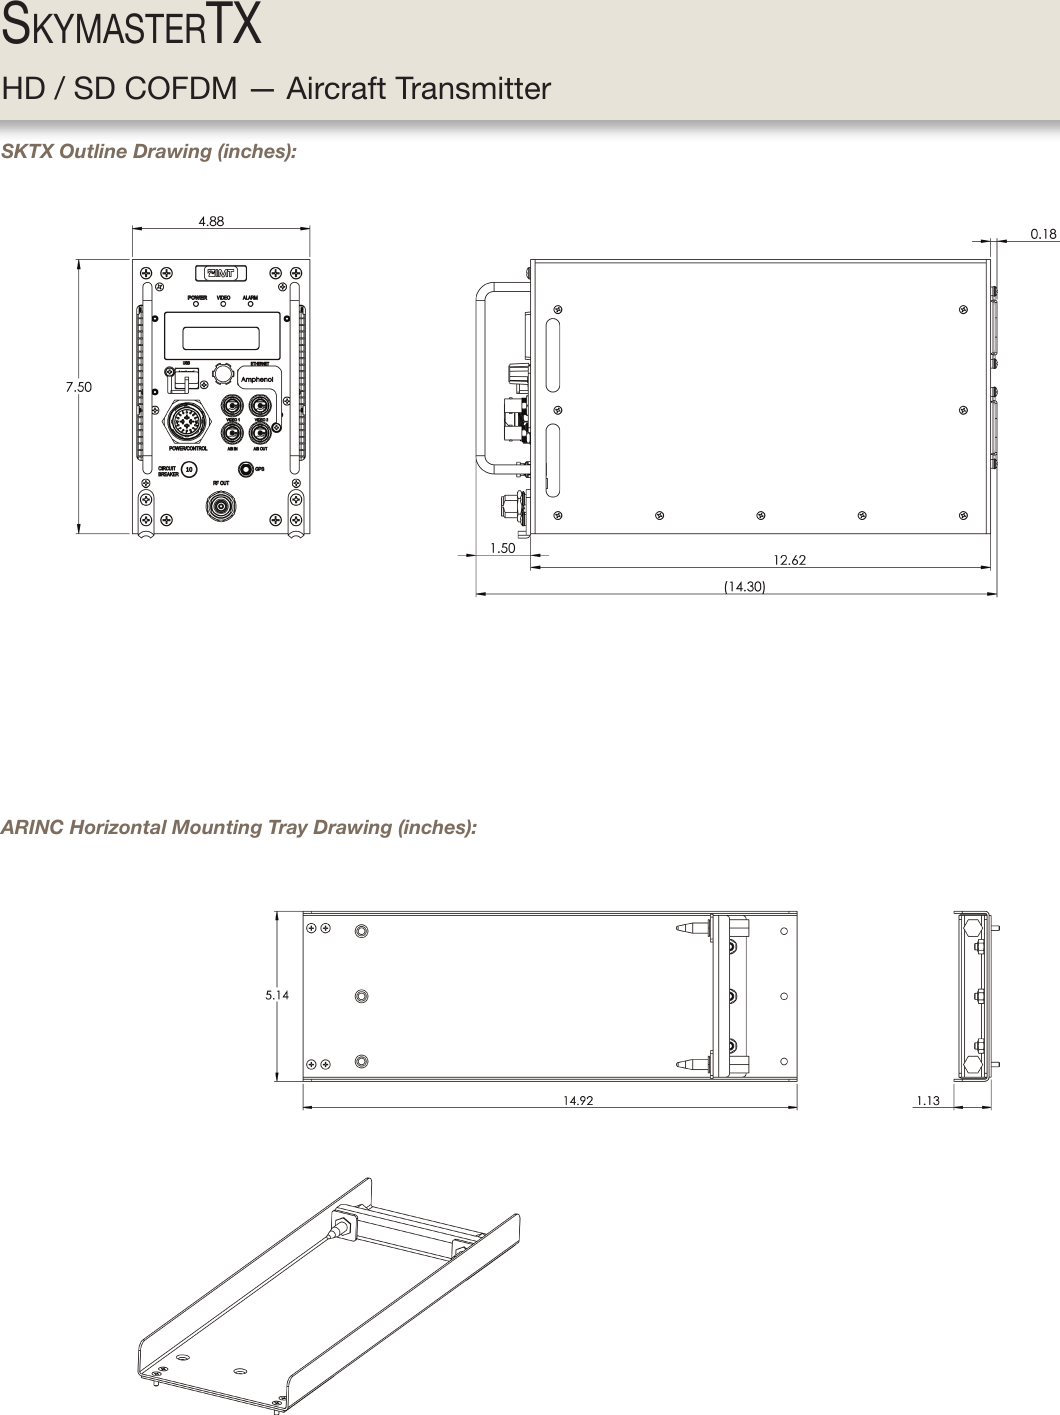 HD / SD COFDM — Aircraft TransmitterSkymaStertXSKTX Outline Drawing (inches):ARINC Horizontal Mounting Tray Drawing (inches):